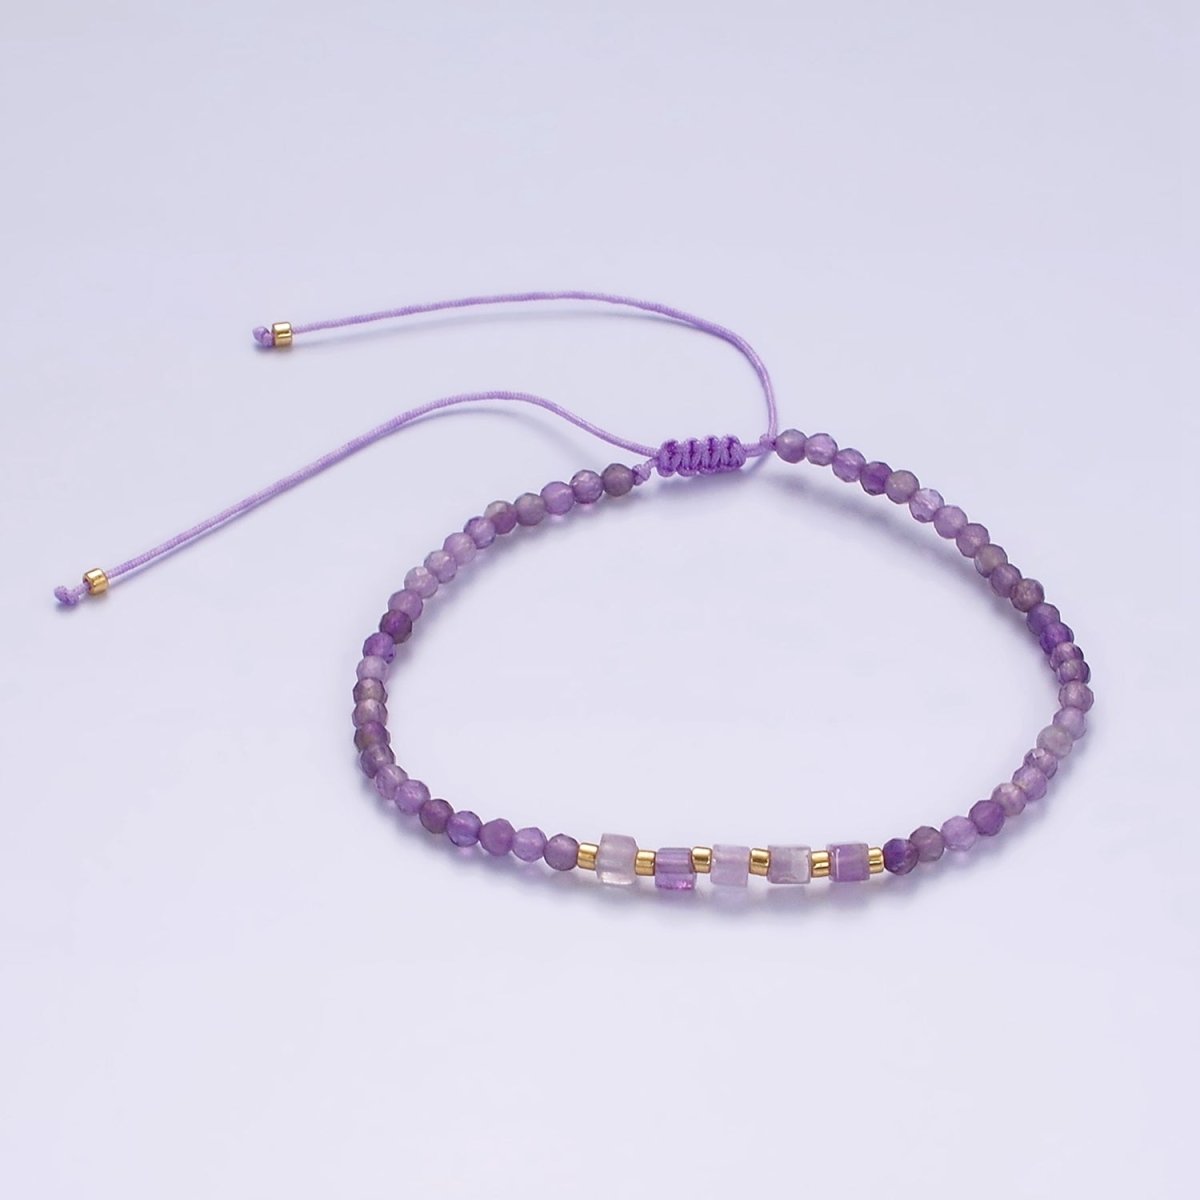 14K Gold Filled Amethyst Multifaceted Purple Rope Adjustable Friendship Bracelet | WA-2007 - WA-2009 Clearance Pricing - DLUXCA